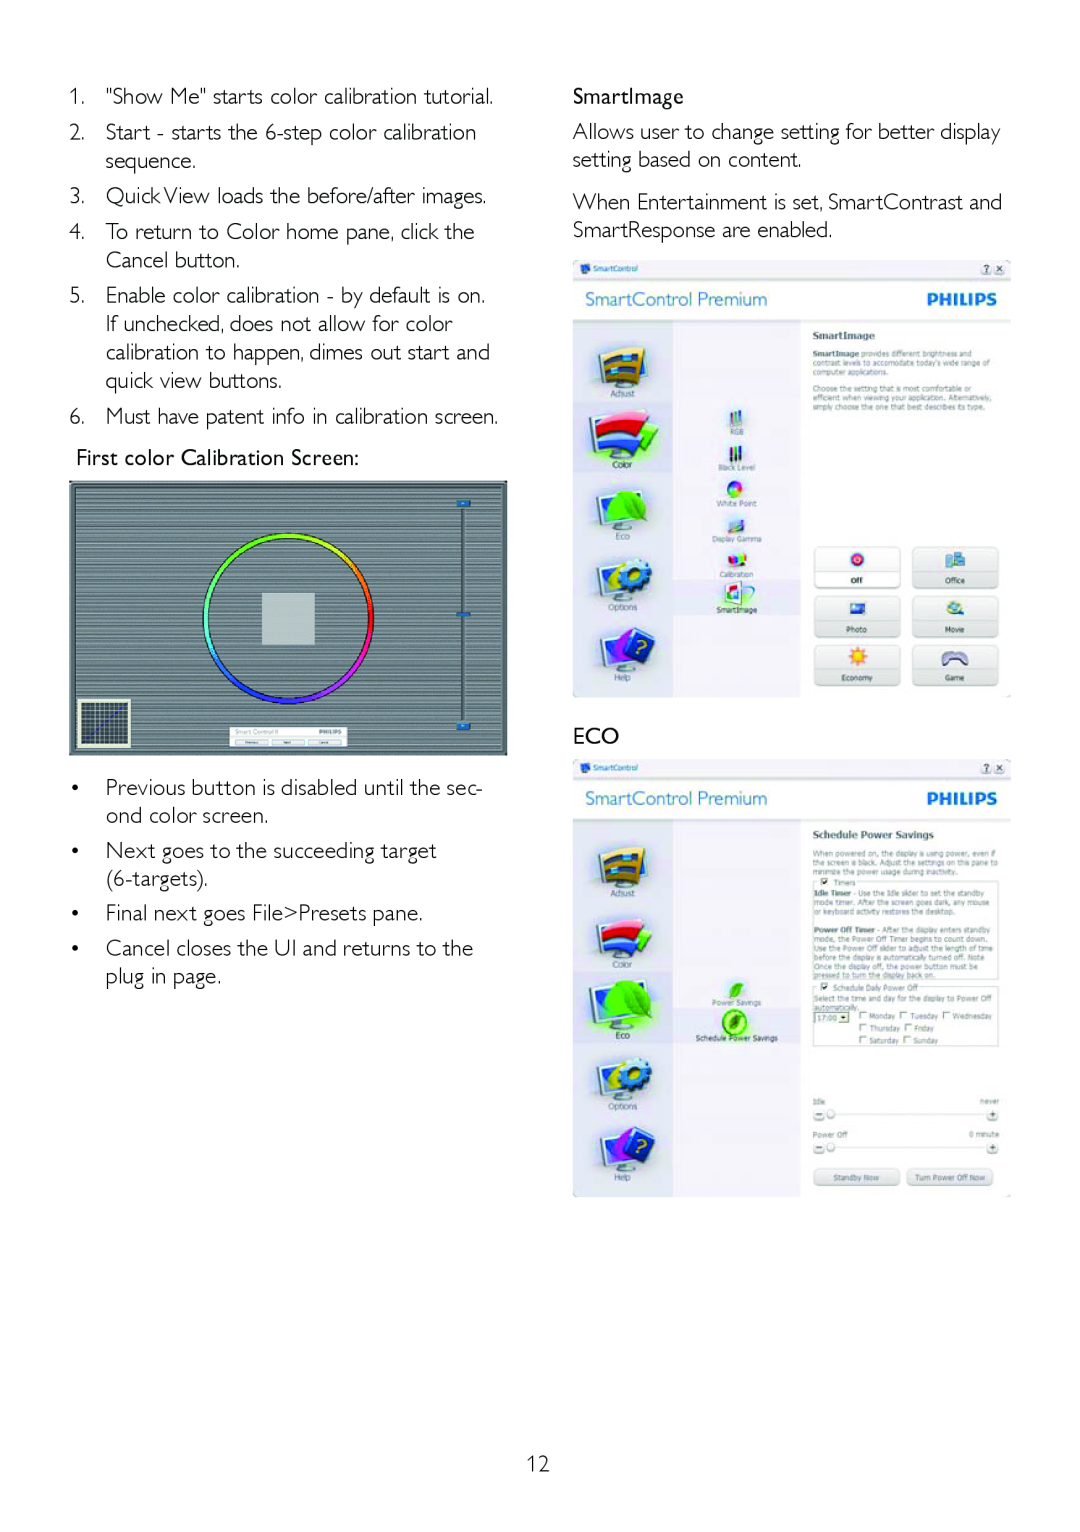 Philips 224CL2 user manual Show Me starts color calibration tutorial 